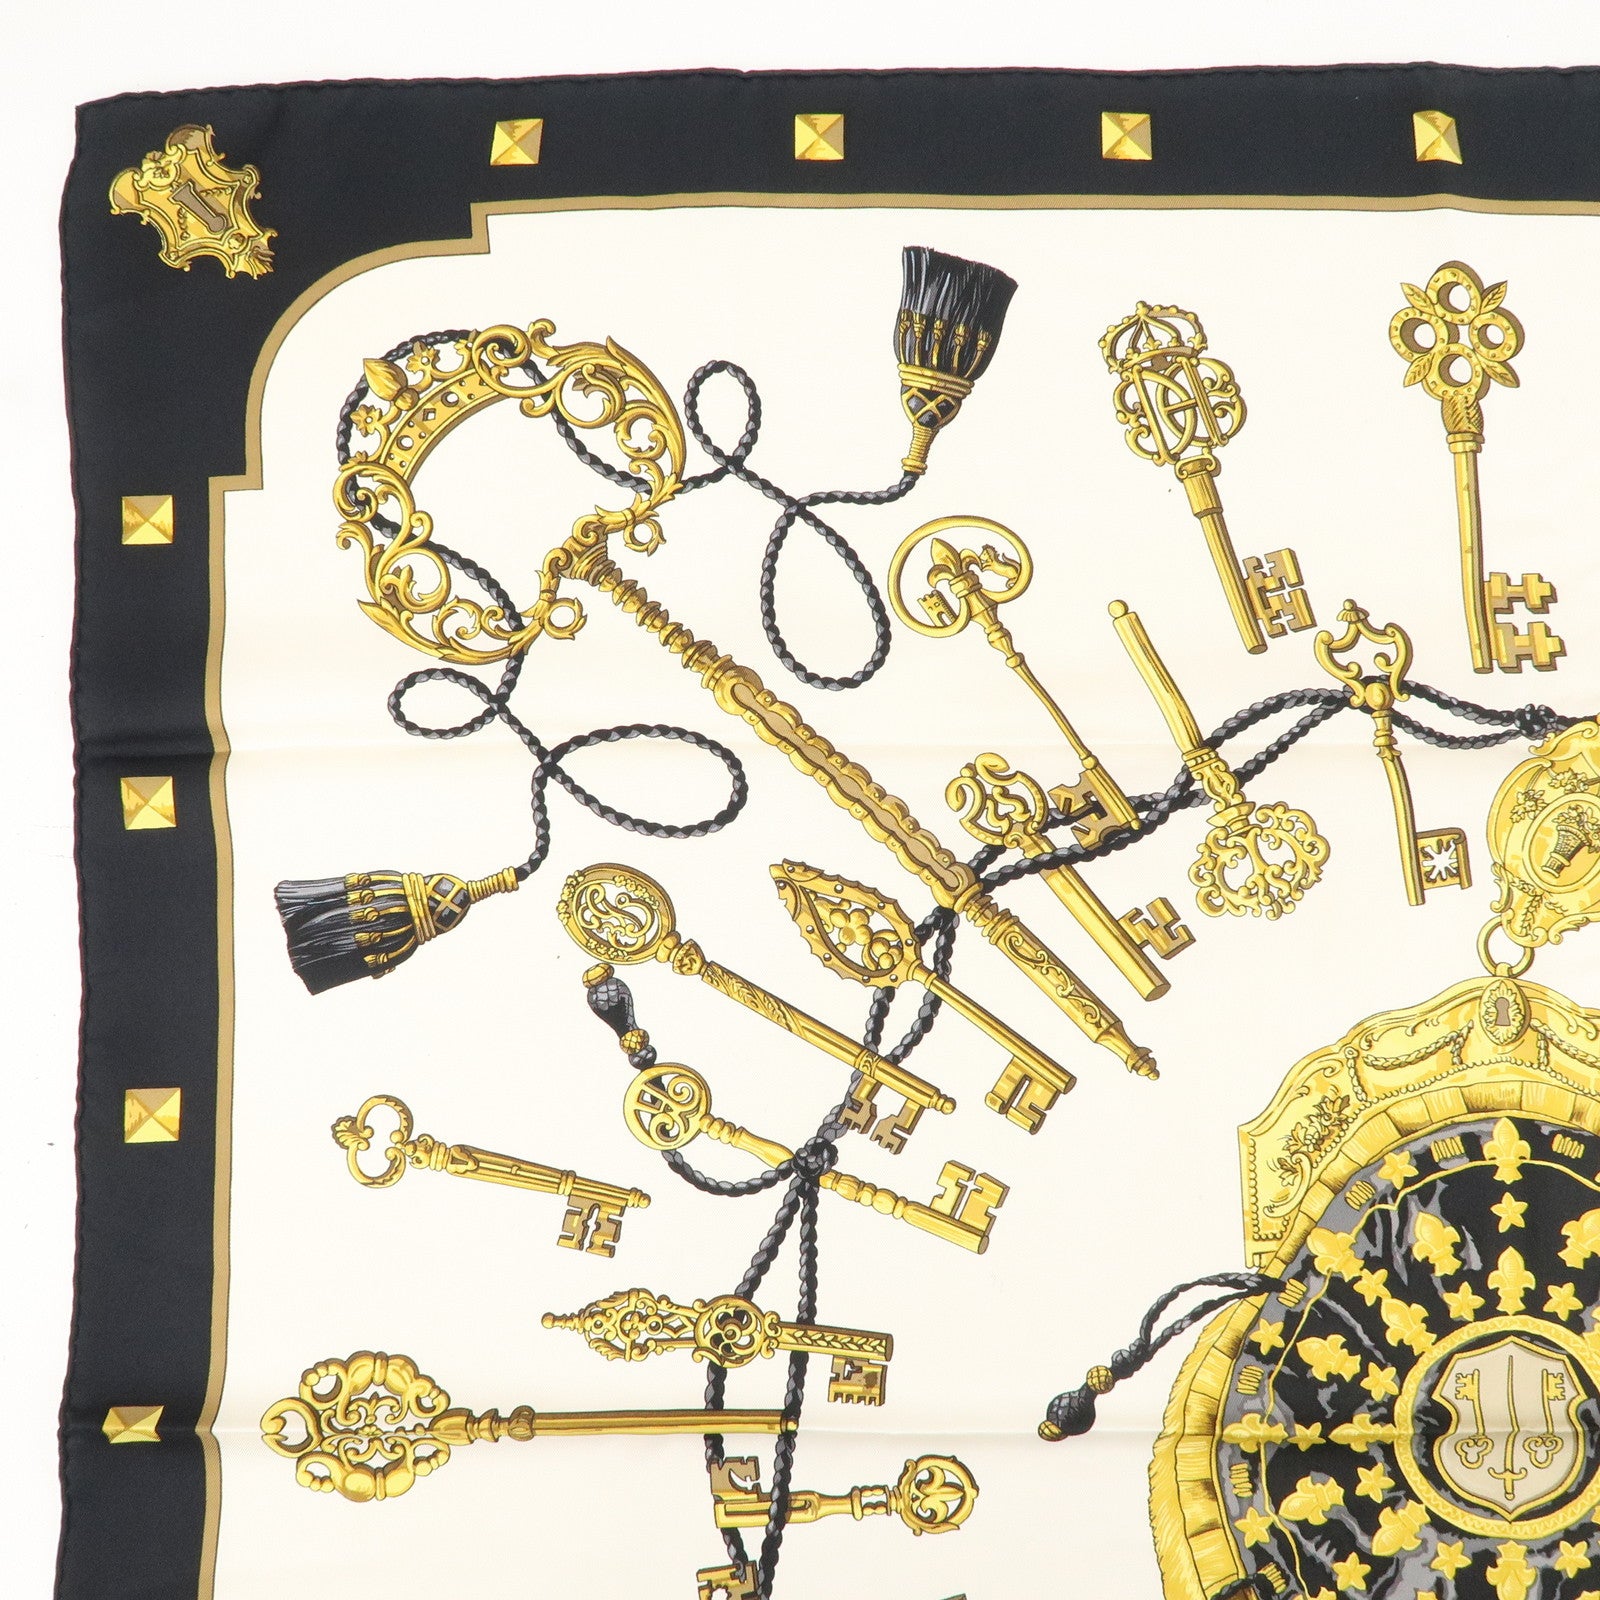 Les Cles Hermes Silk Scarf White and Black